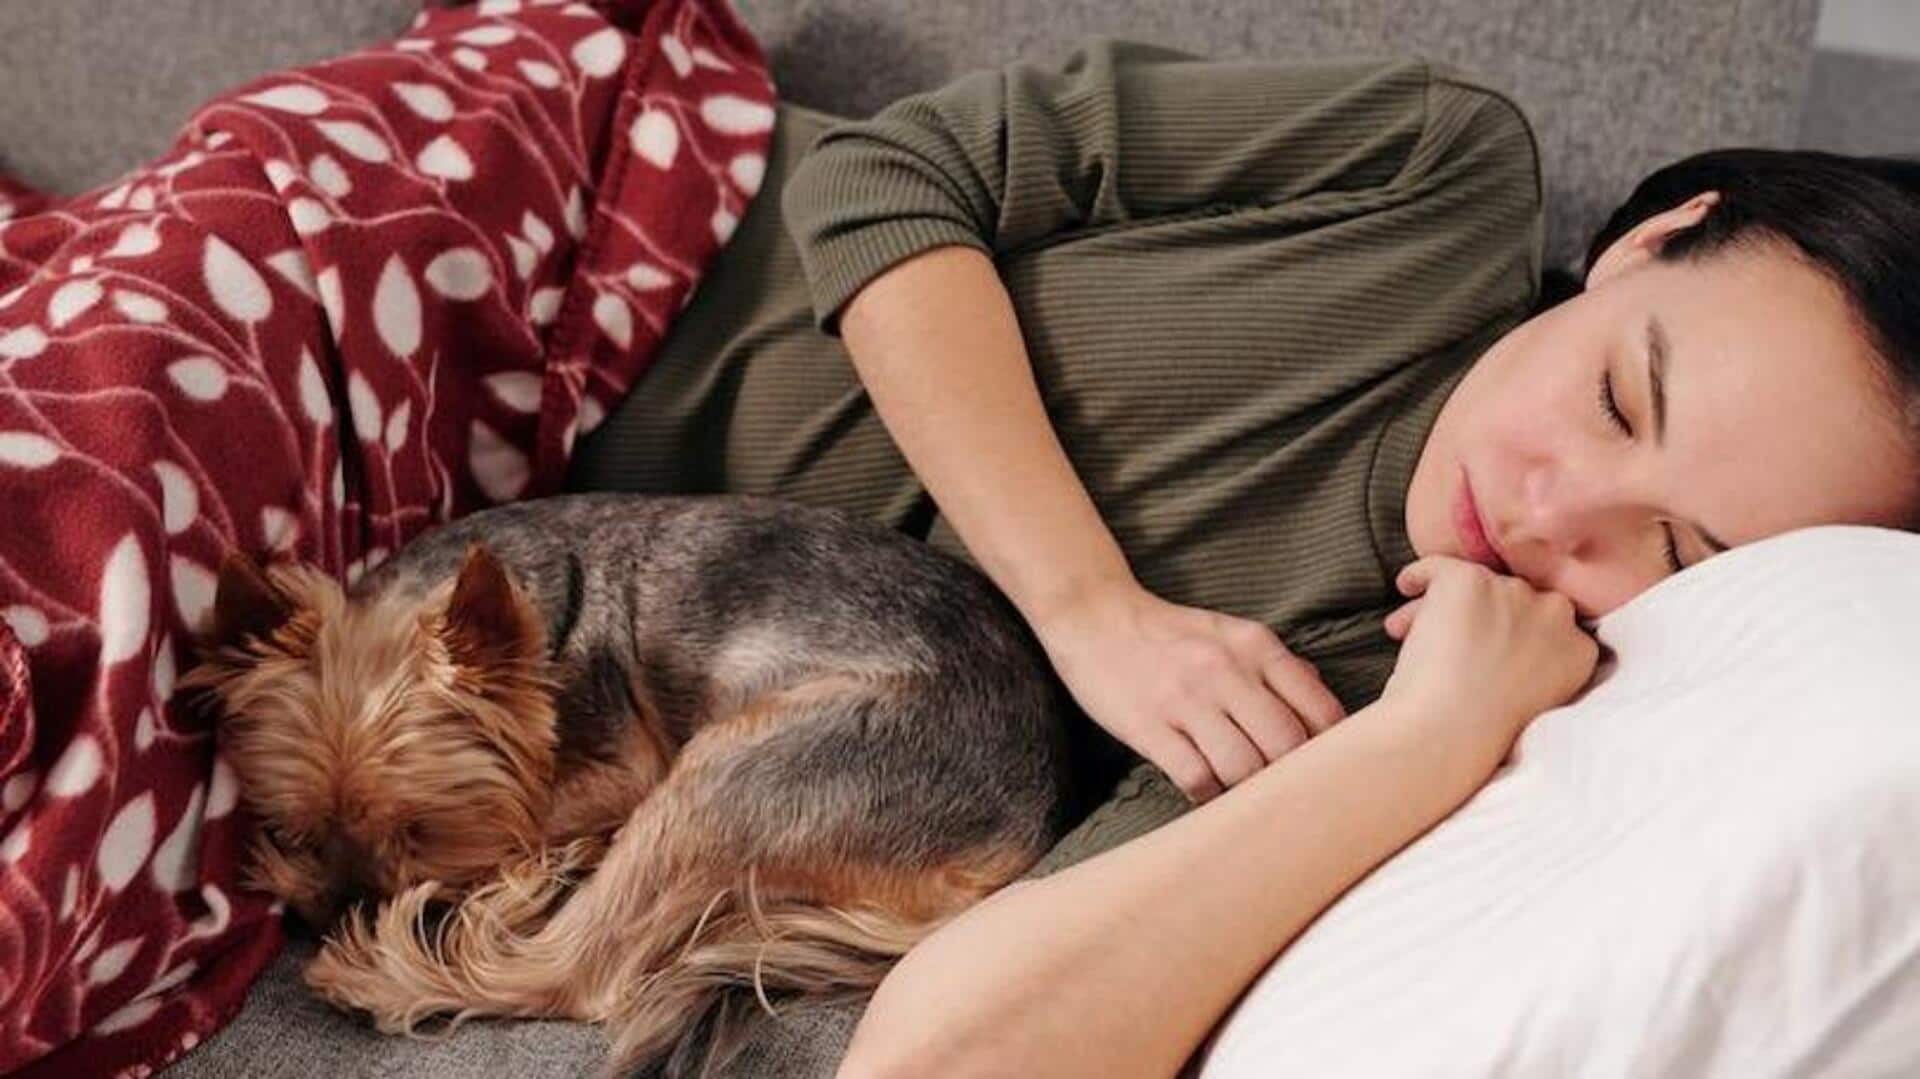 Is sleeping with pets good for you